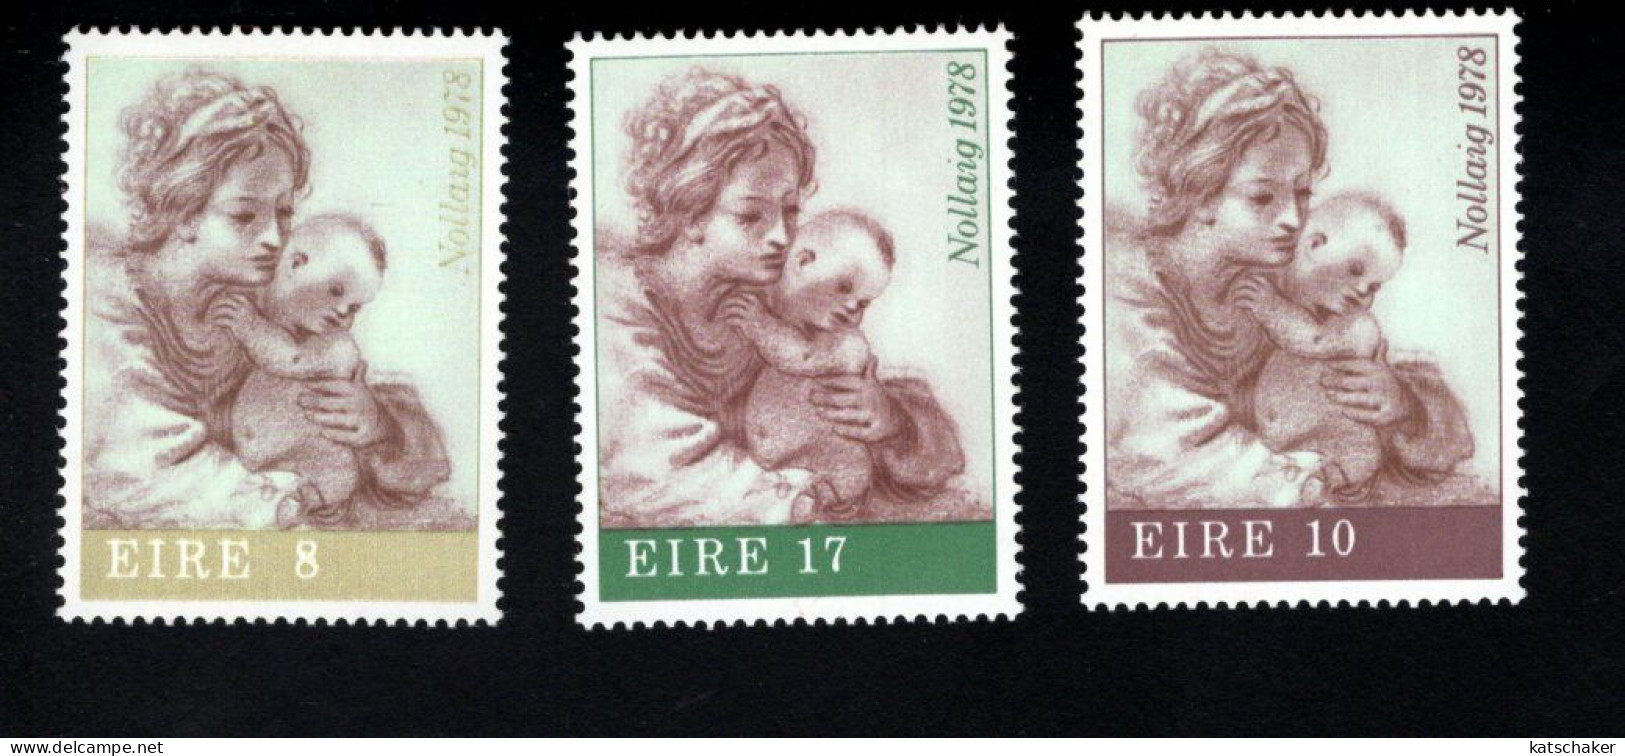 2002470377 1978 SCOTT  440 442  (XX) POSTFRIS  MINT NEVER HINGED - CHRISTMAS - VIRGIN AND CHILD BY GUERCINO - Unused Stamps